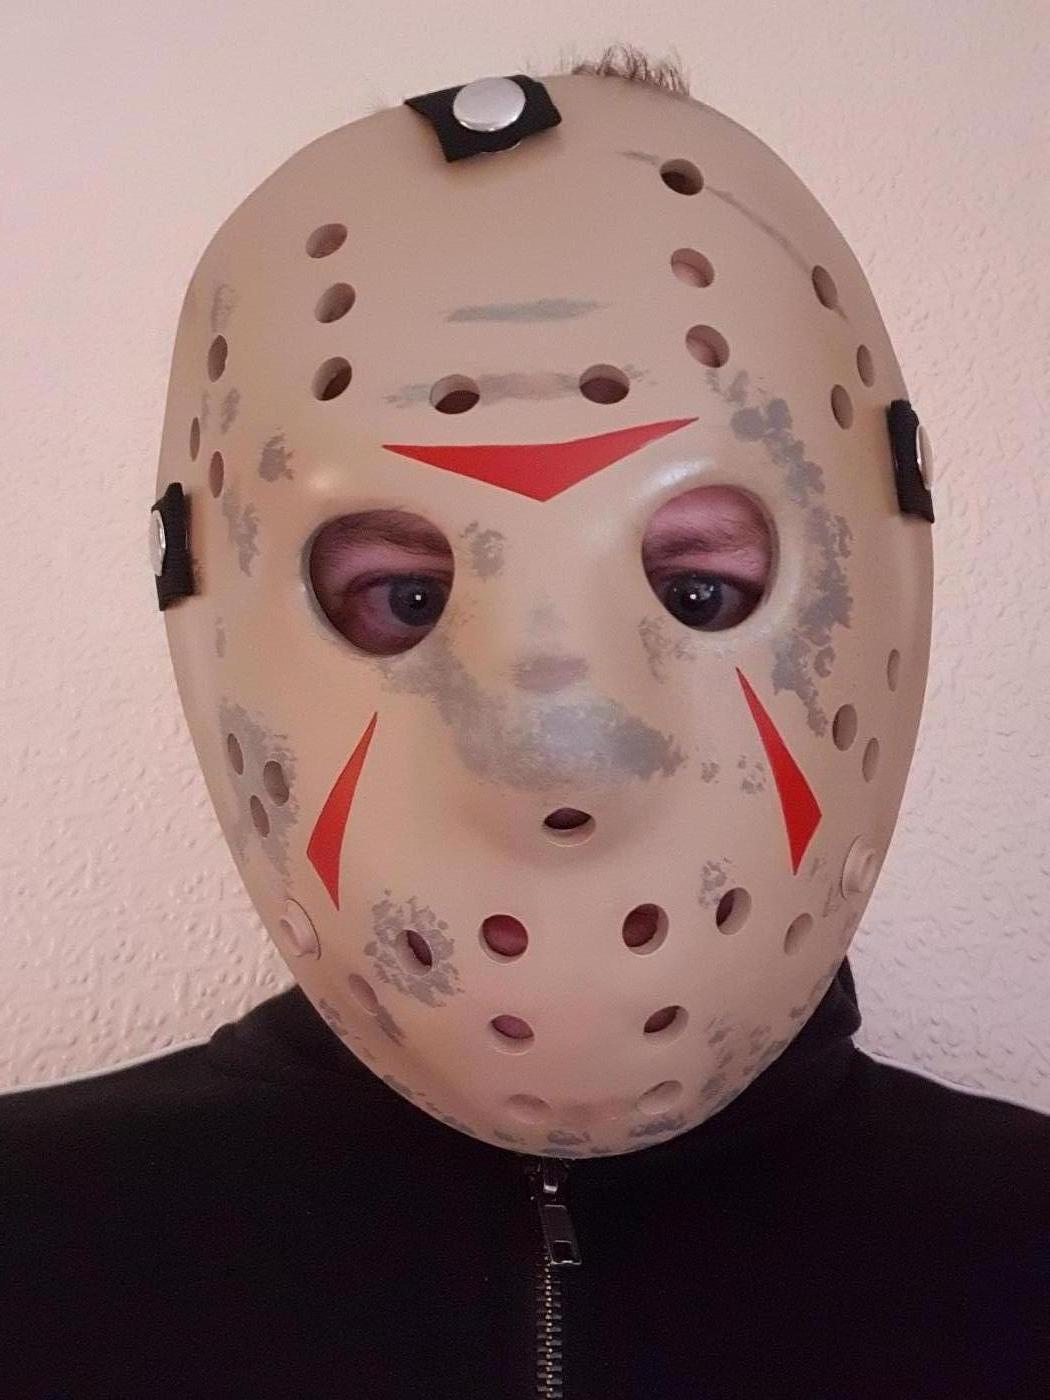 Jason Voorhees, Mask Replica, Friday the 13th Part III.